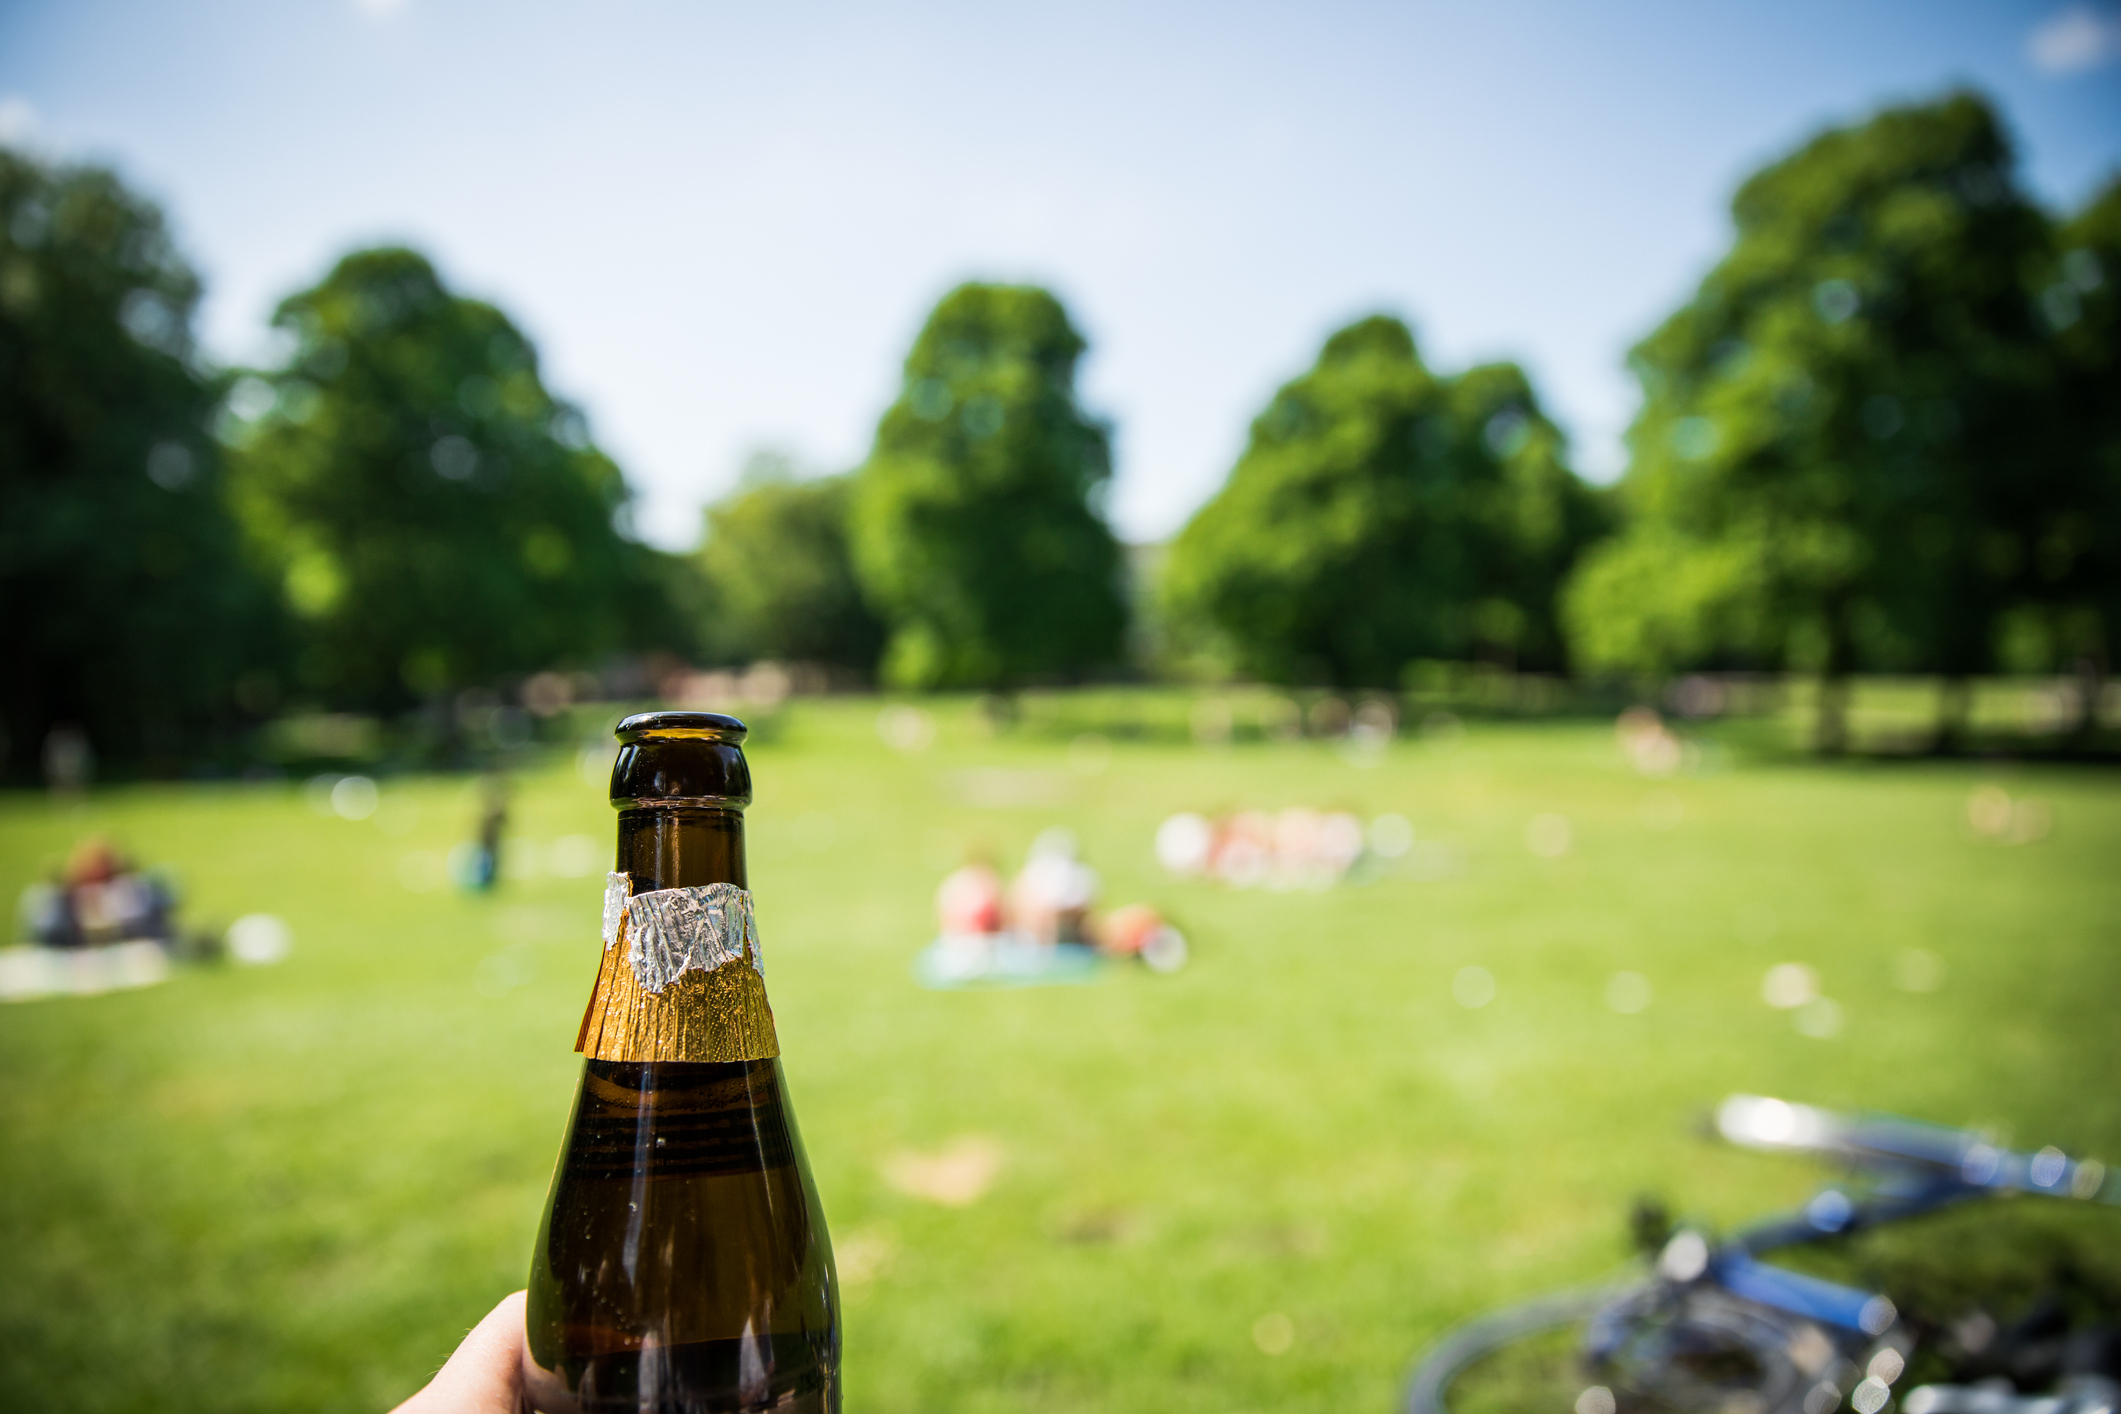 Hand holding a champagne bottle in a park with people sitting on the grass in the background